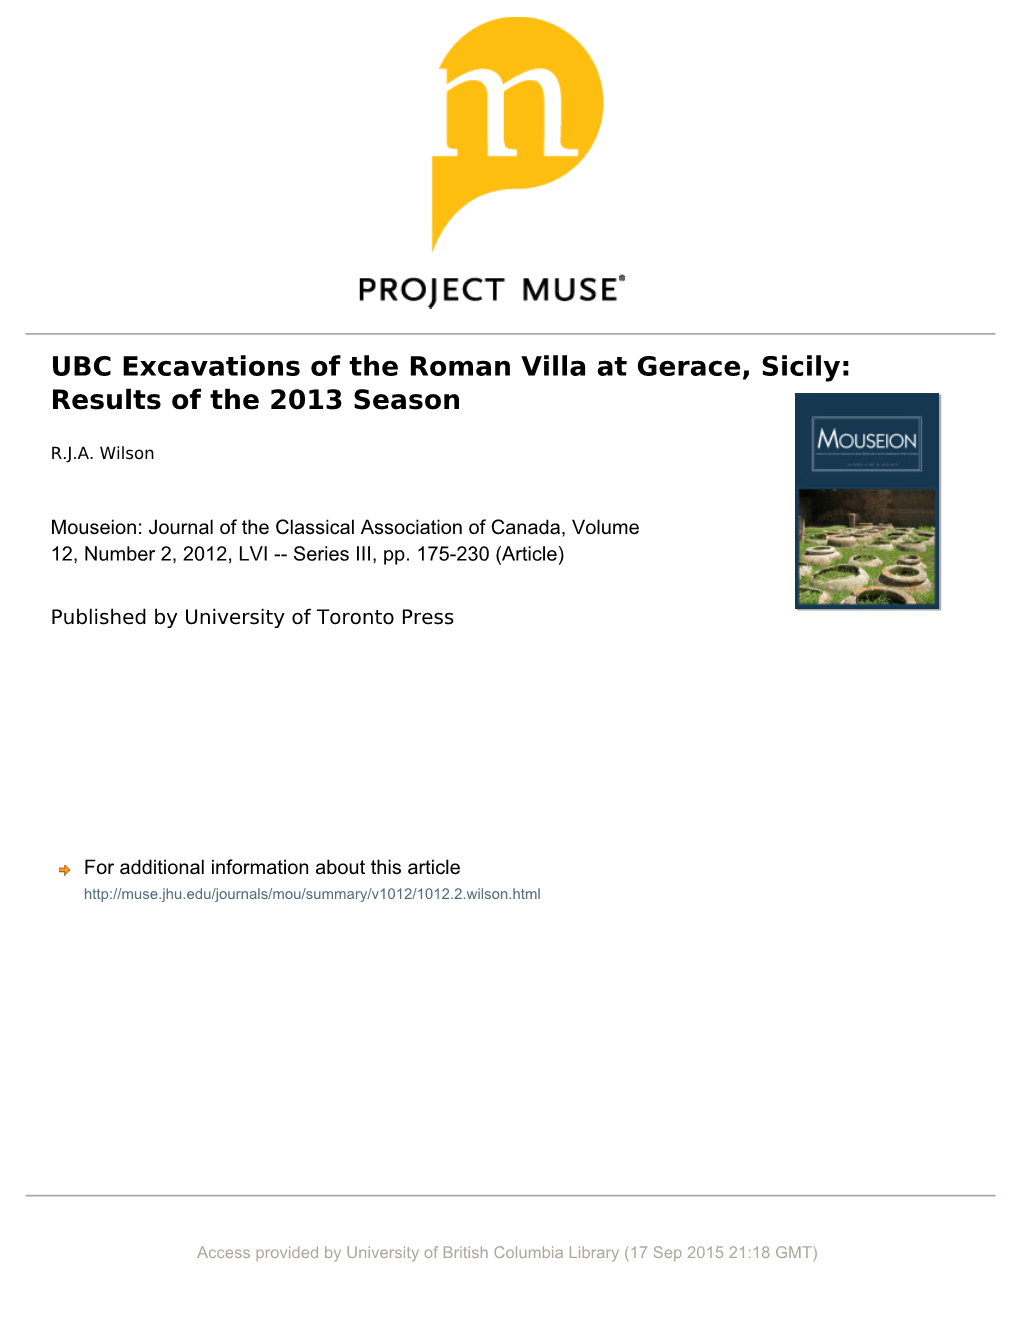 UBC Excavations of the Roman Villa at Gerace, Sicily: Results of the 2013 Season